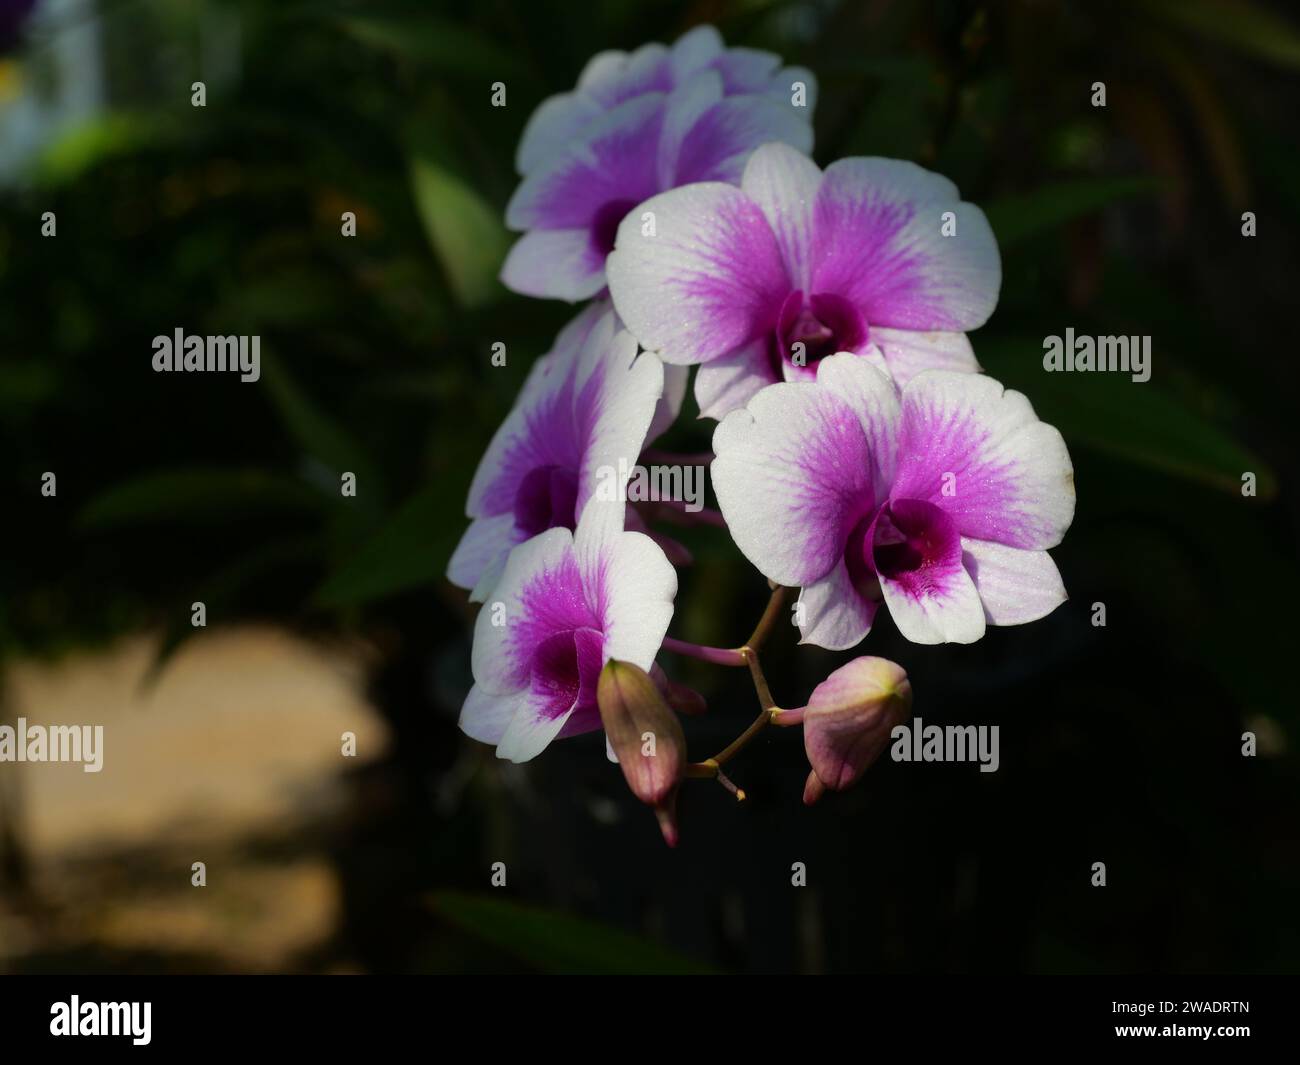 White With Purple Stripes of Phalaenopsis Orchids blossom with natural green and black background,, Moth orchid flower in Thailand Stock Photo